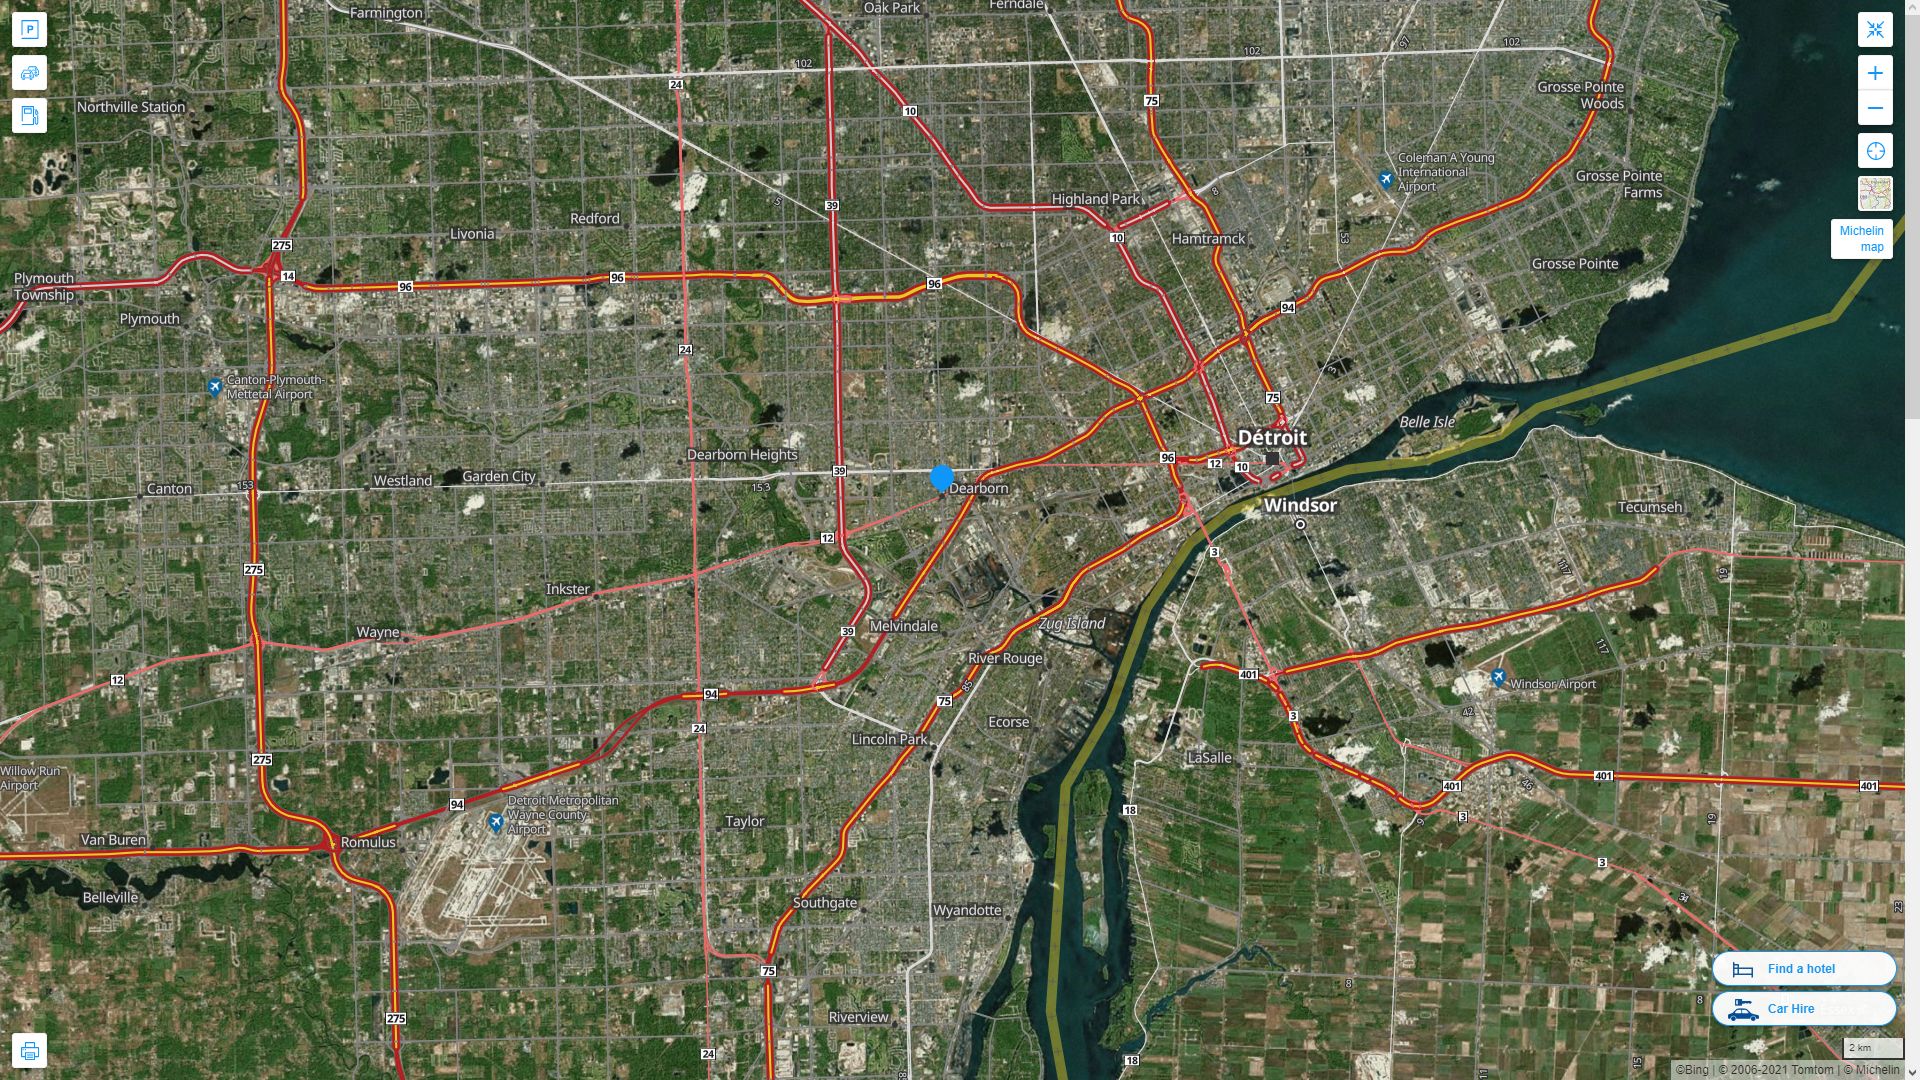 Dearborn Michigan Highway and Road Map with Satellite View